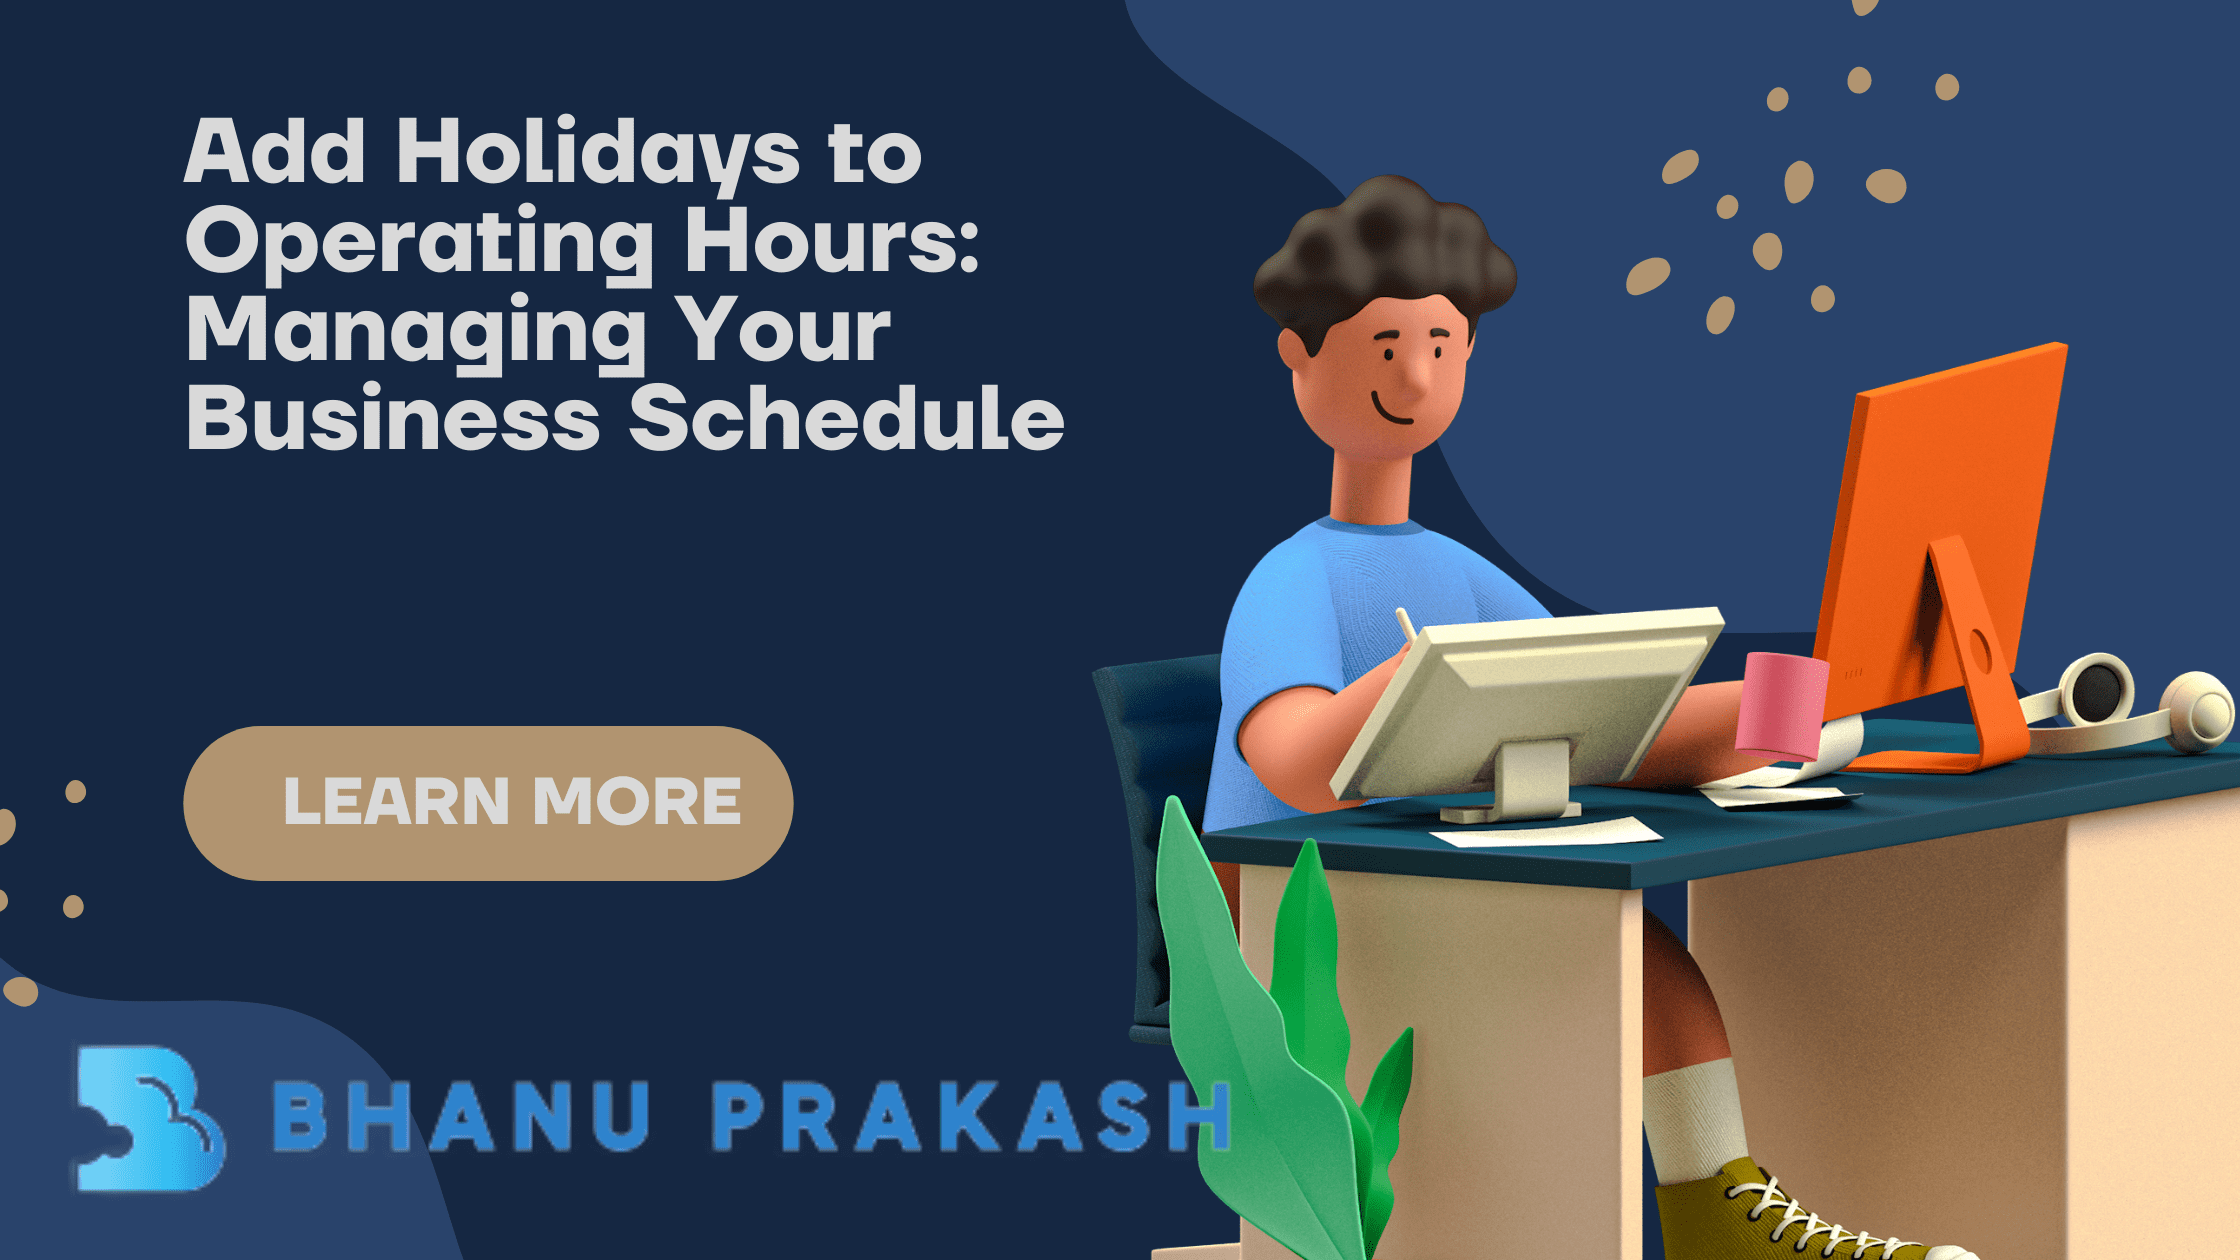 Add Holidays to Operating Hours